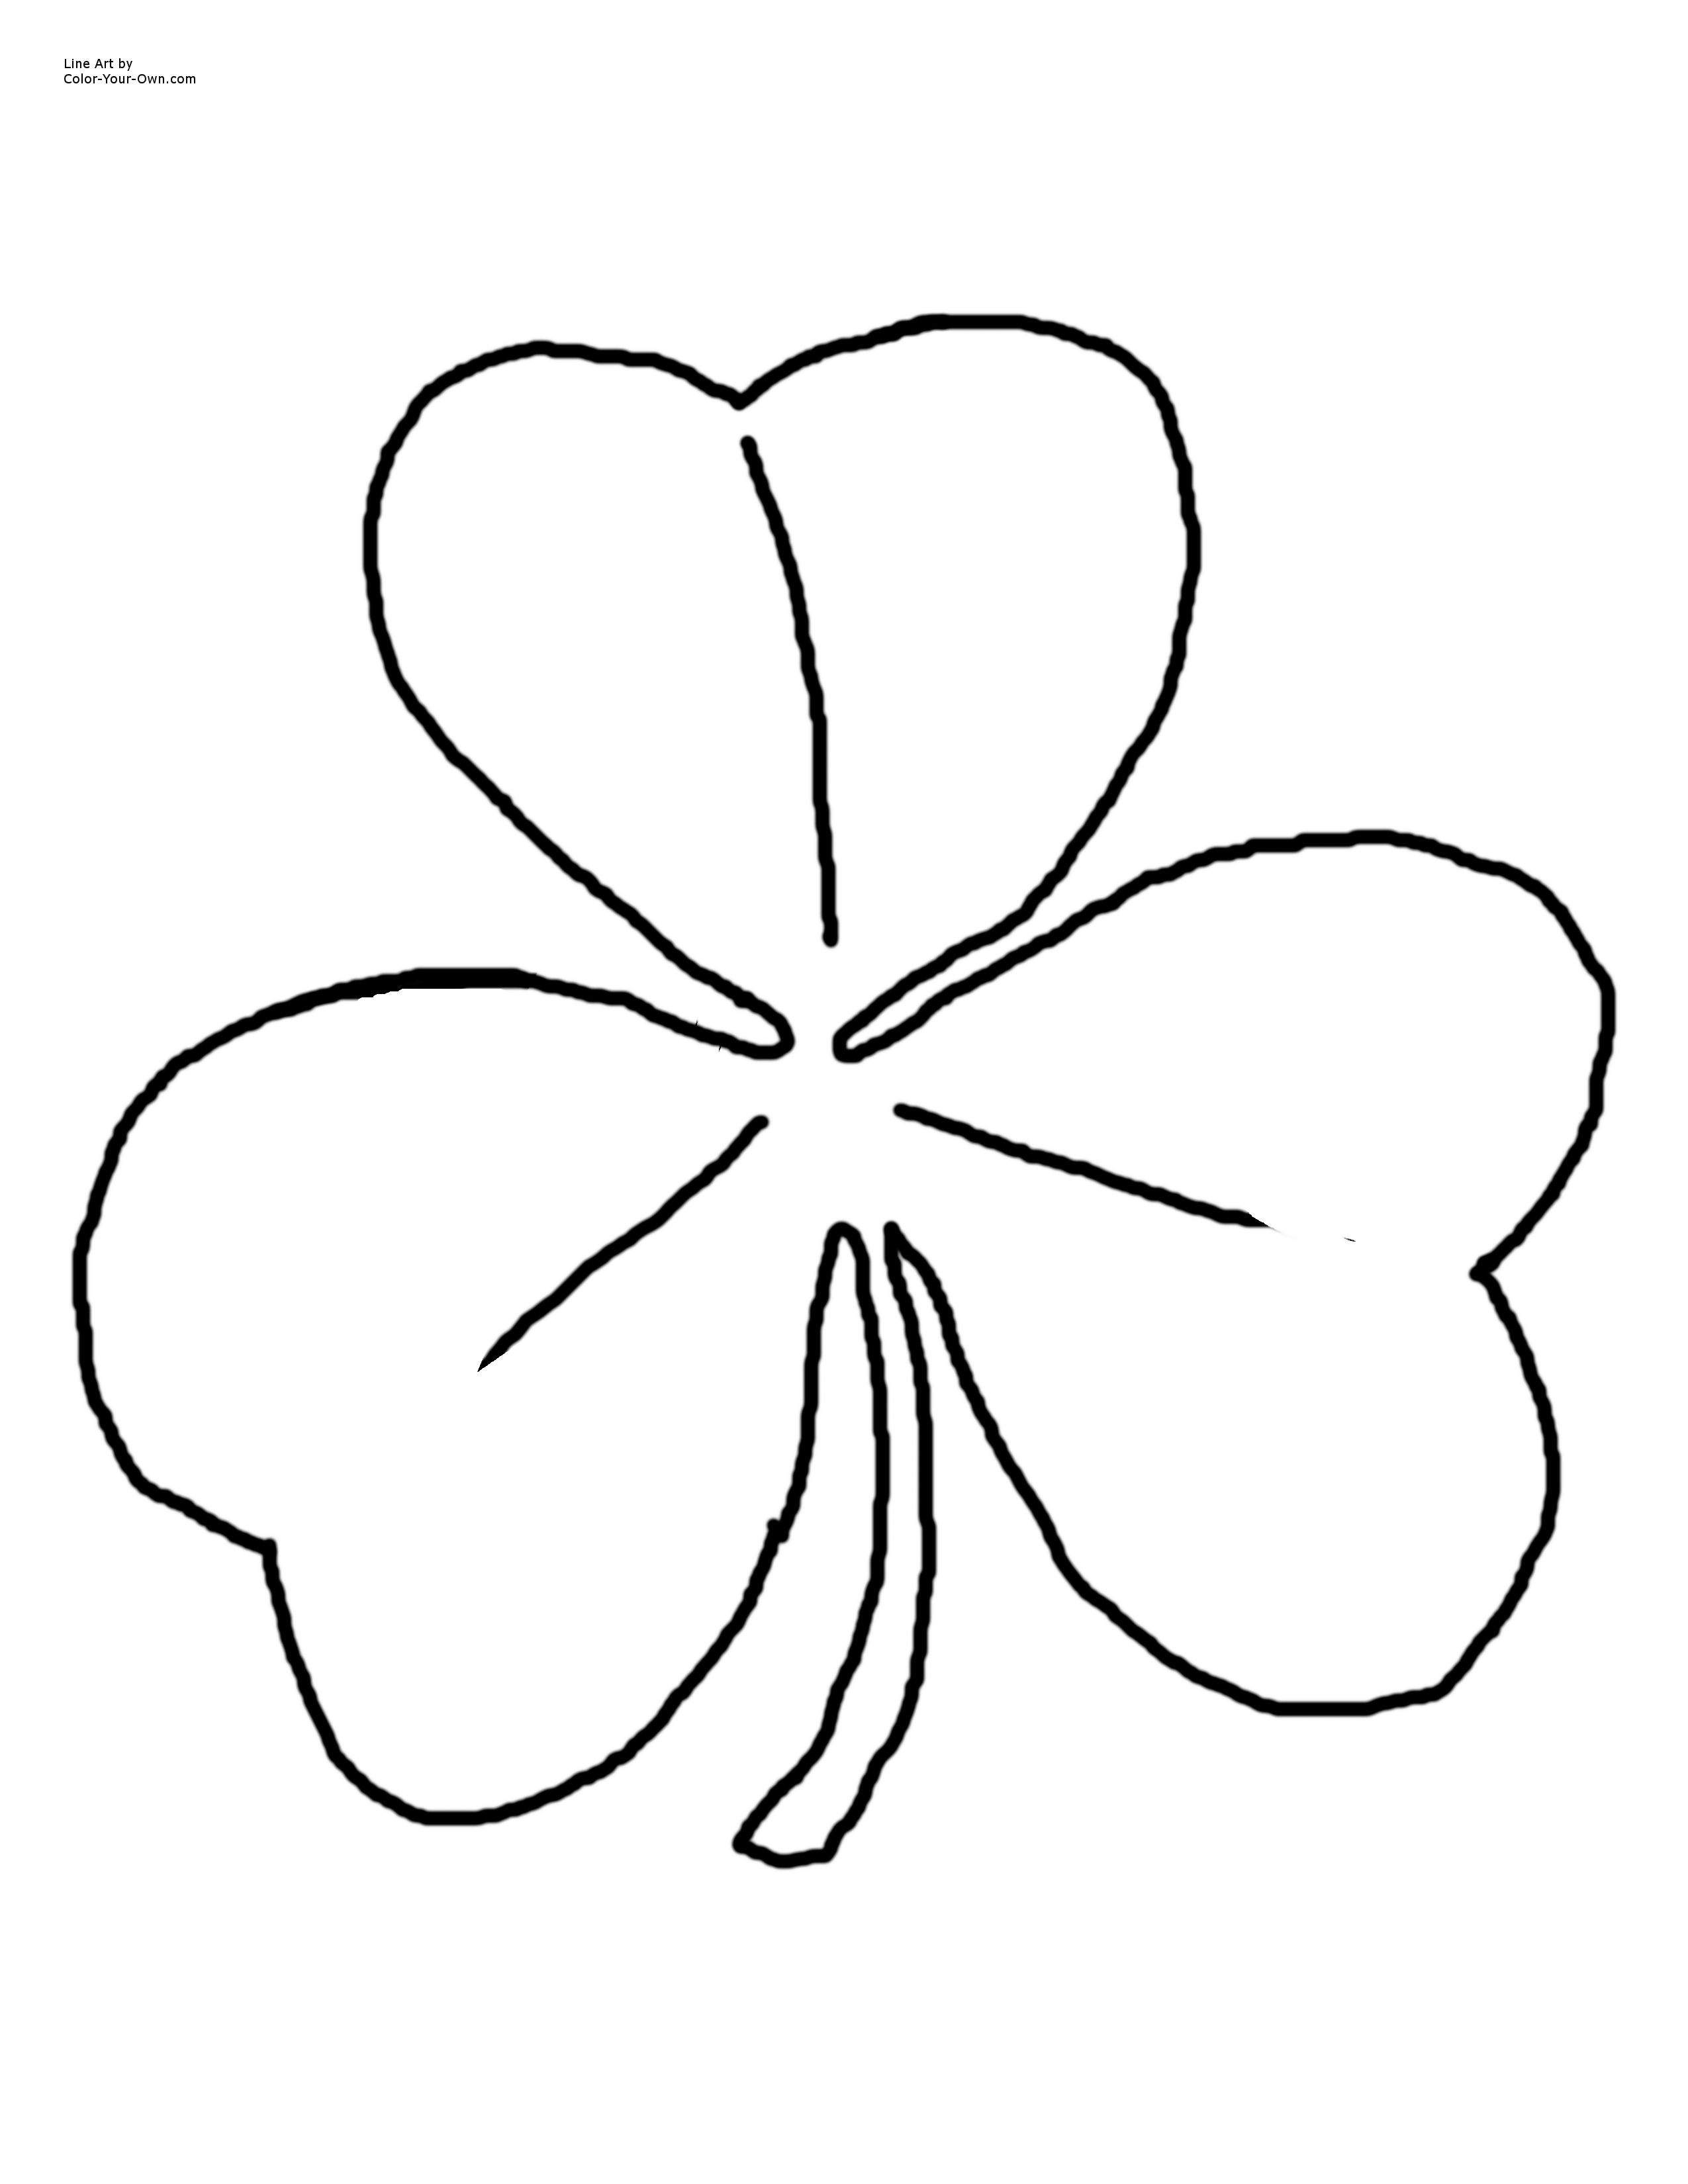 Shamrock Coloring Pages | Free coloring pages for kids - ClipArt ...